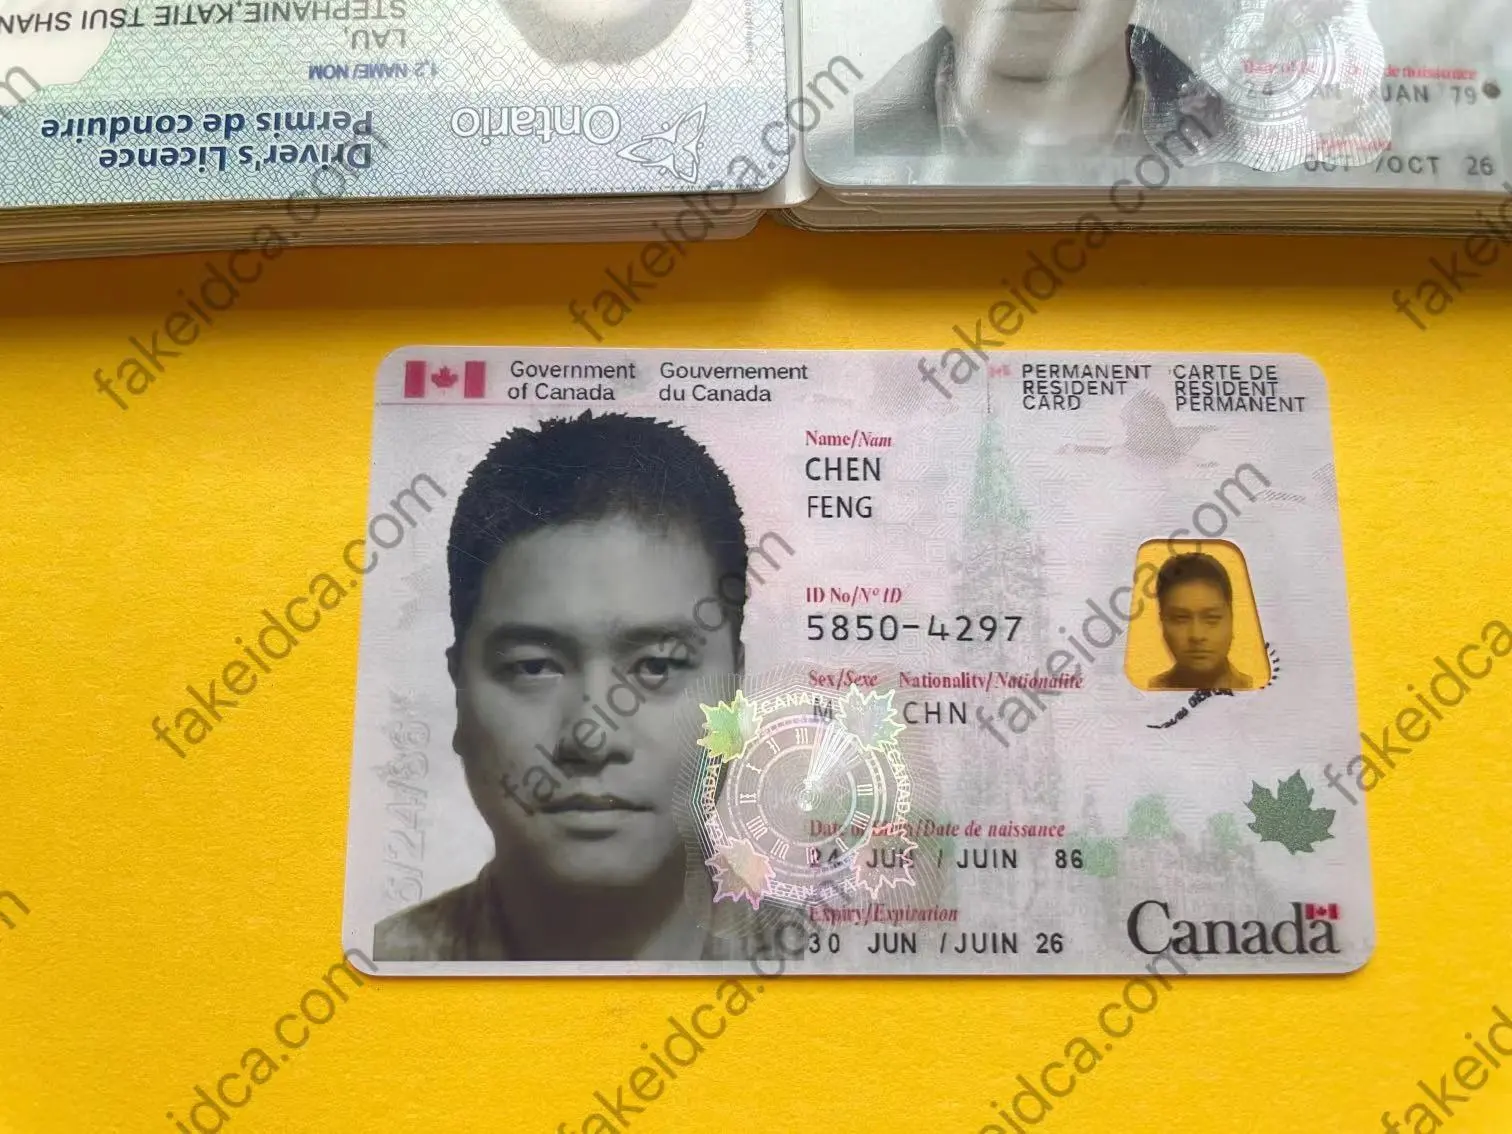 Fake ID Canada | Is It Illegal To Have A Fake ID in Canada? | Buy Jiaz Hao